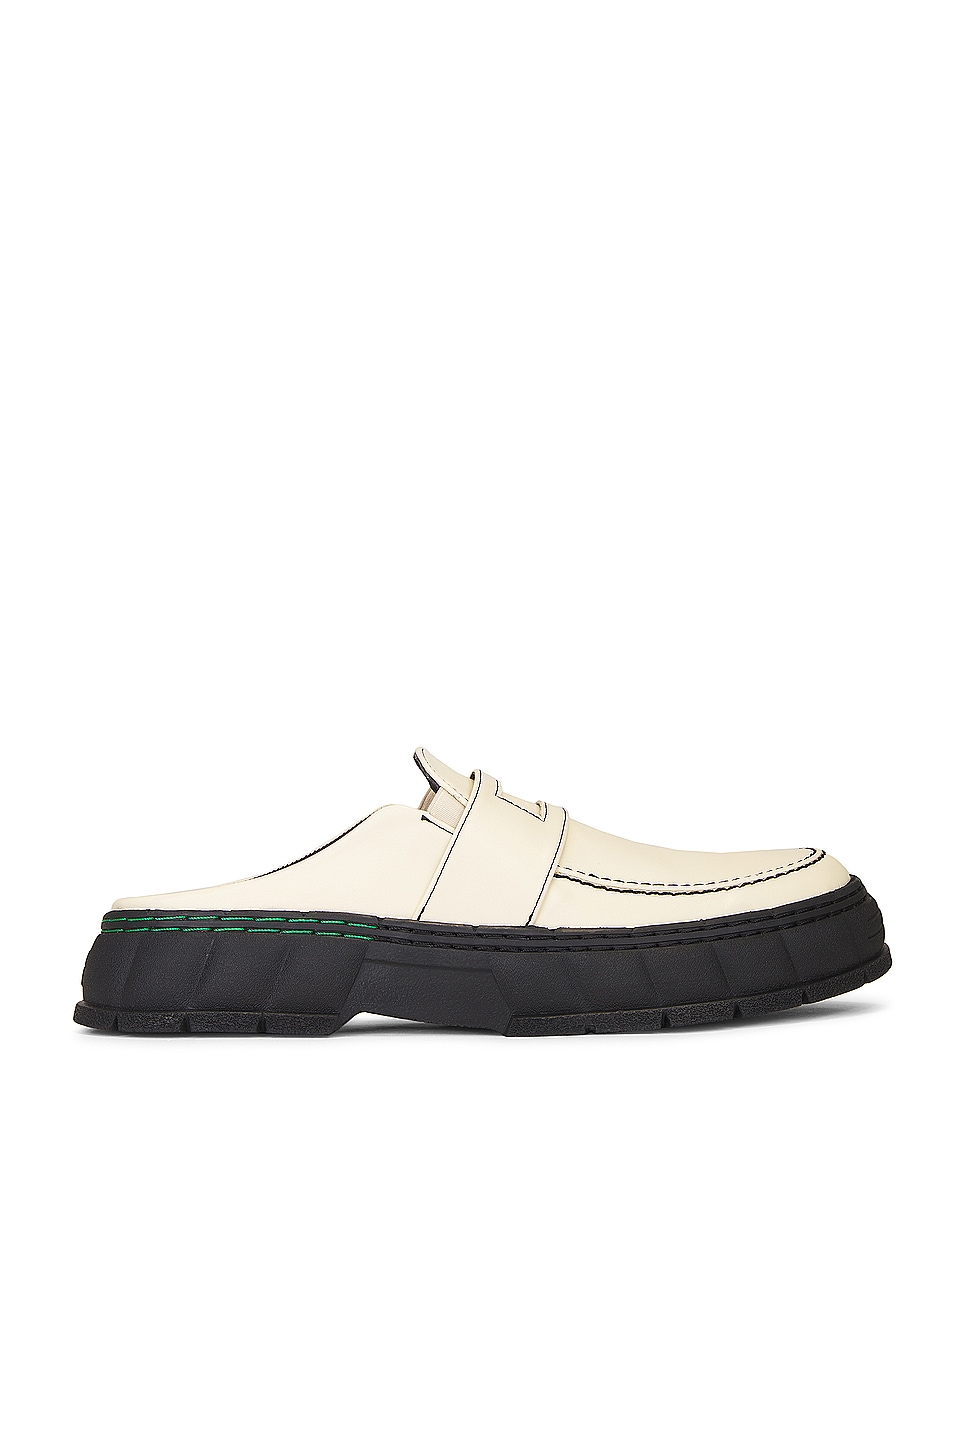 Image 1 of Viron 1969 Mule Loafer in Creme